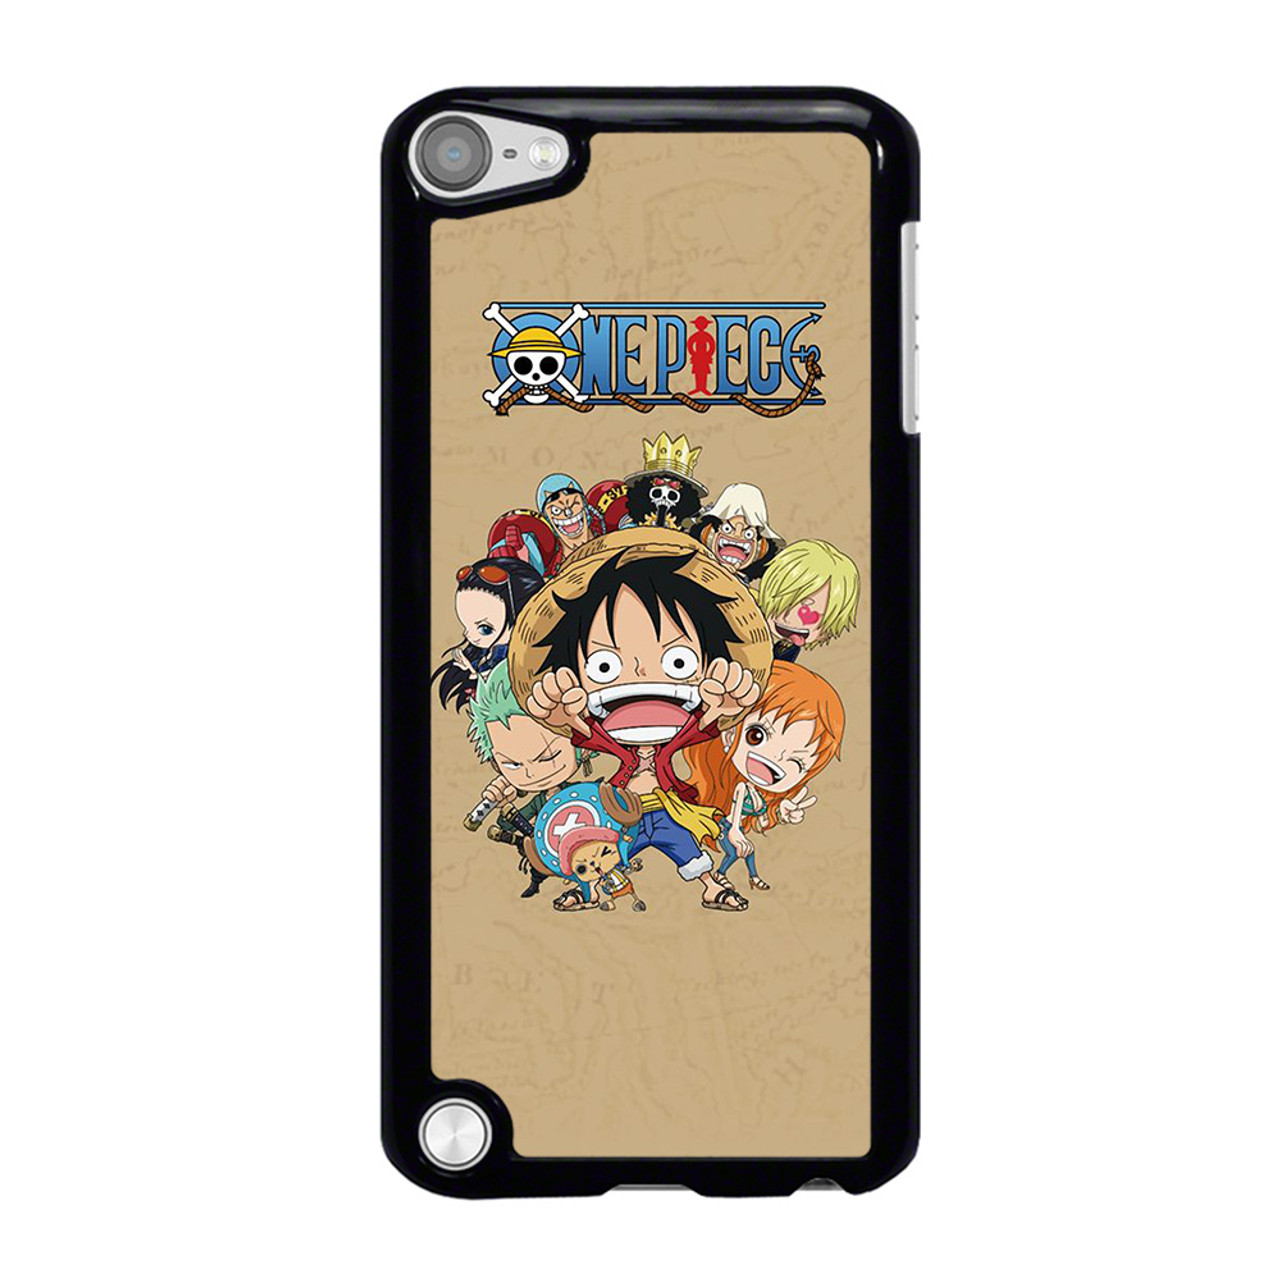 ONE PIECE ANIME KAWAII iPod Touch 5 Case Cover